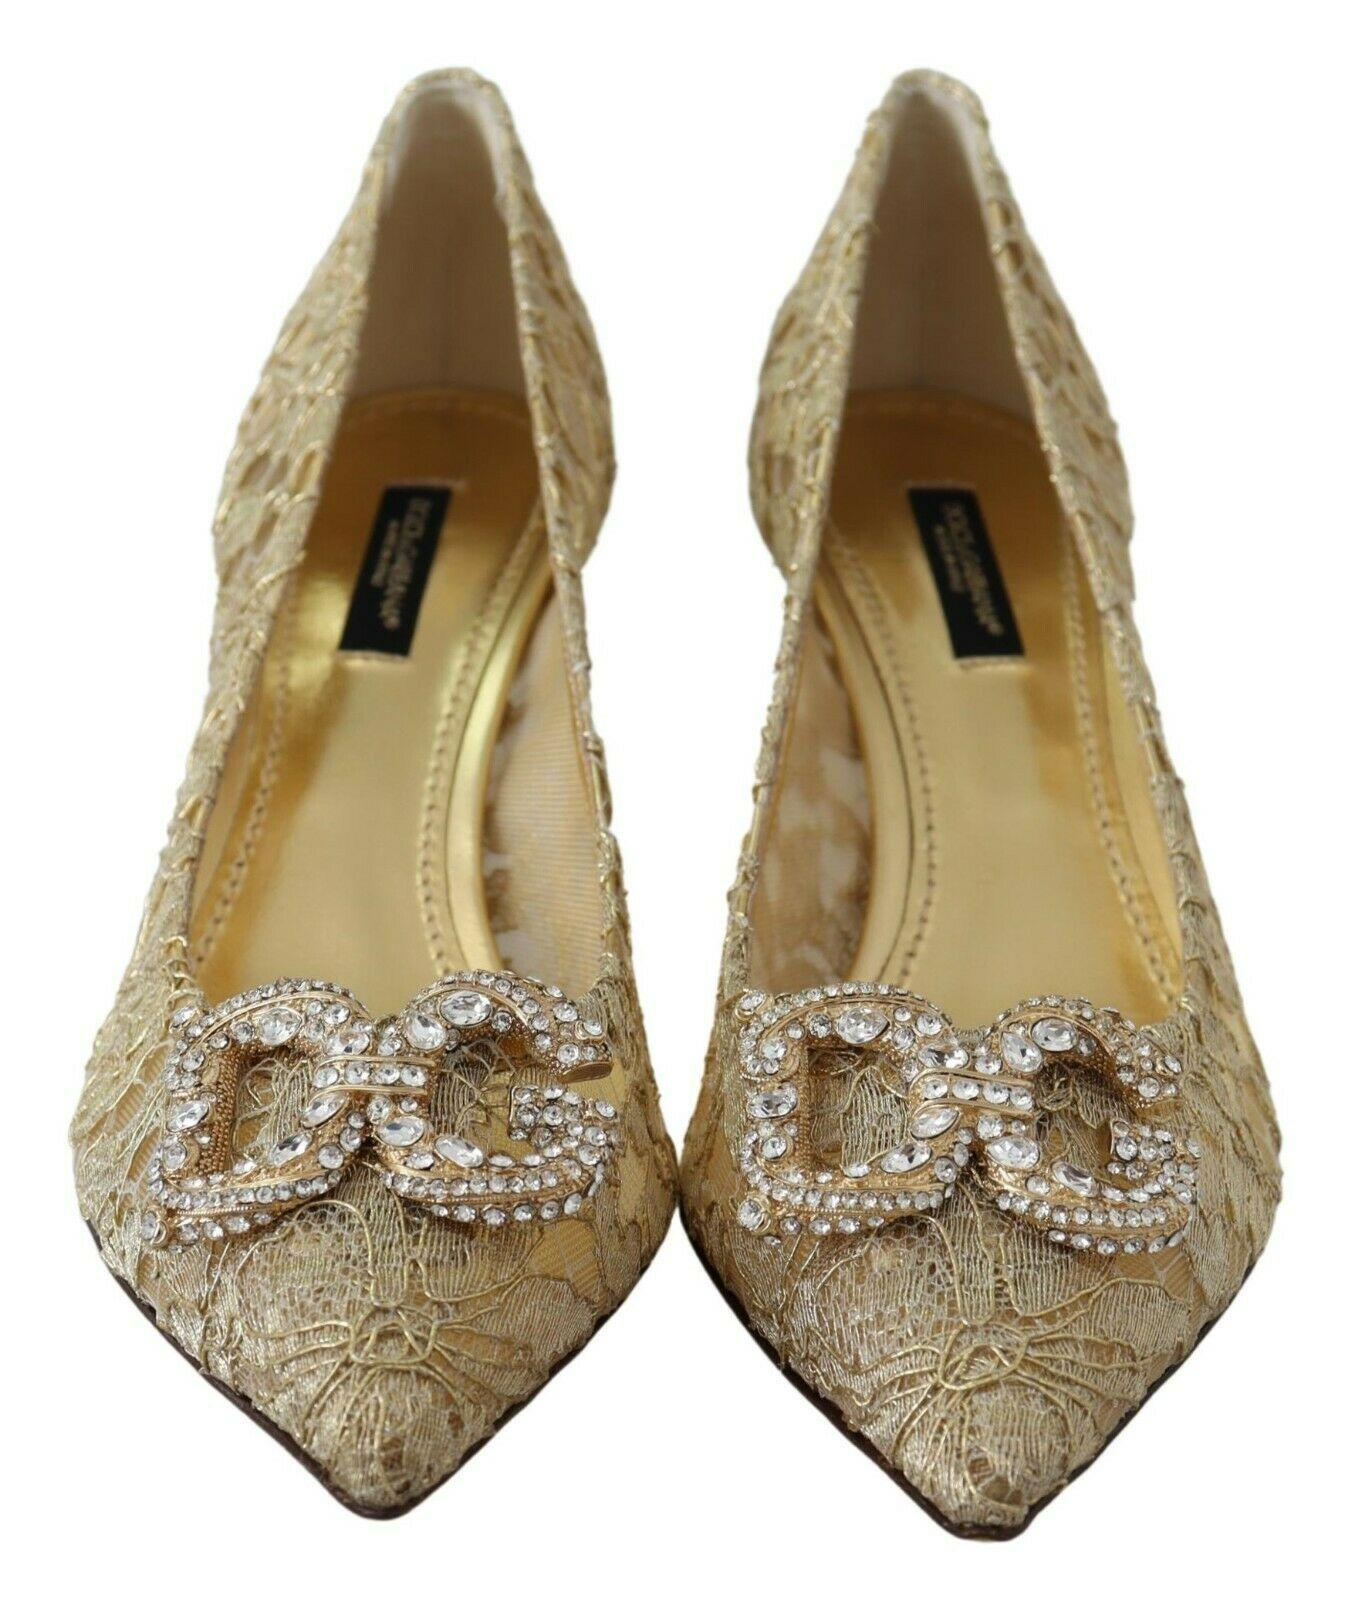 Gorgeous brand new with tags, 100% Authentic Dolce & Gabbana PUMP lace shoes with DG jewel detail on the top.

 
Model: Pumps


Color: Gold 
Material: 52% PA, 10% PL, 38% Leather

Sole: Leather

Logo details

Very high quality and comfort

Made in